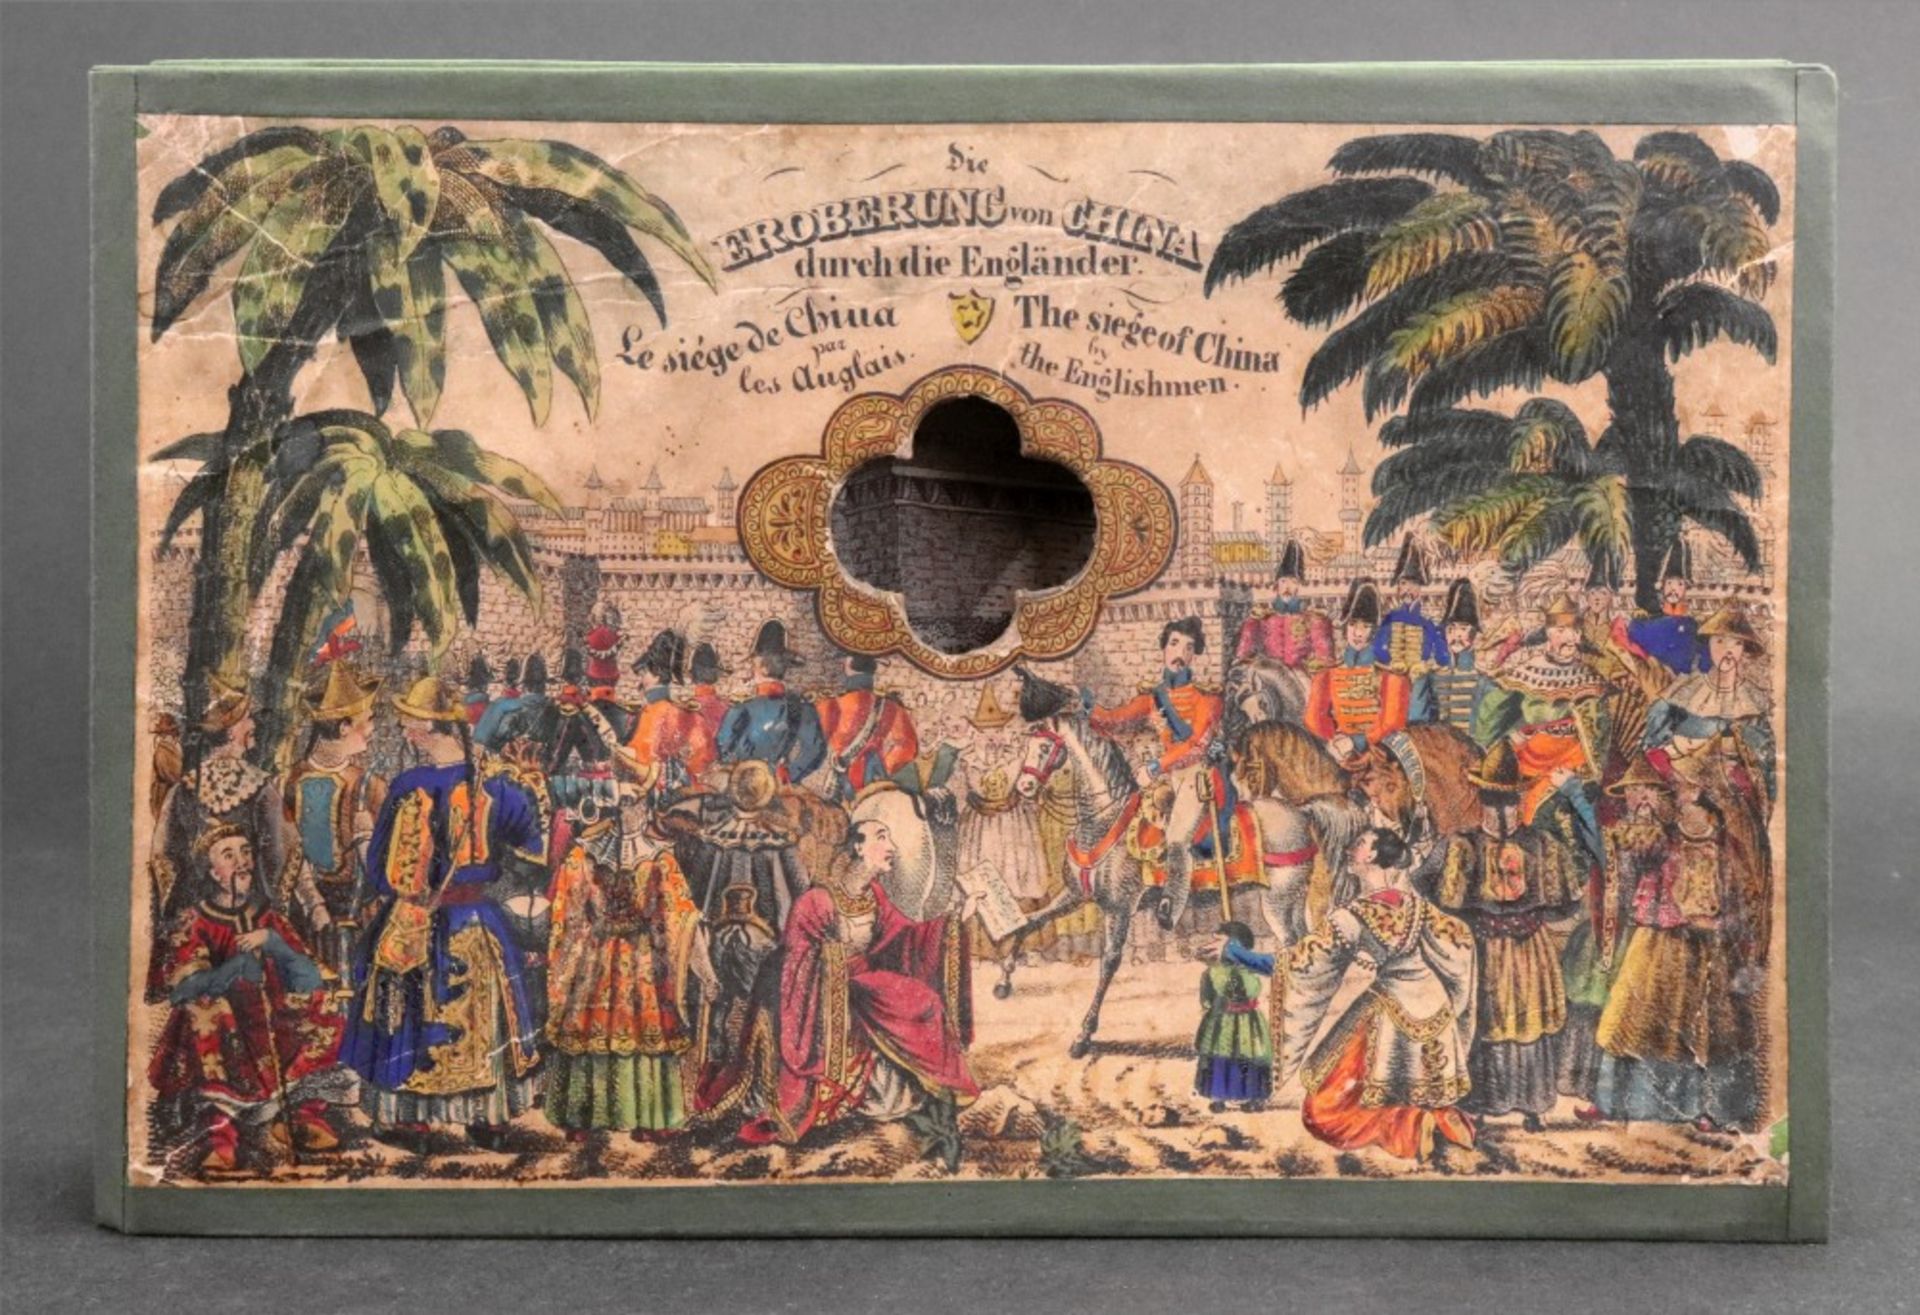 The Siege of China by the Englishmen, 19th century, a hand coloured telescopic viewer,